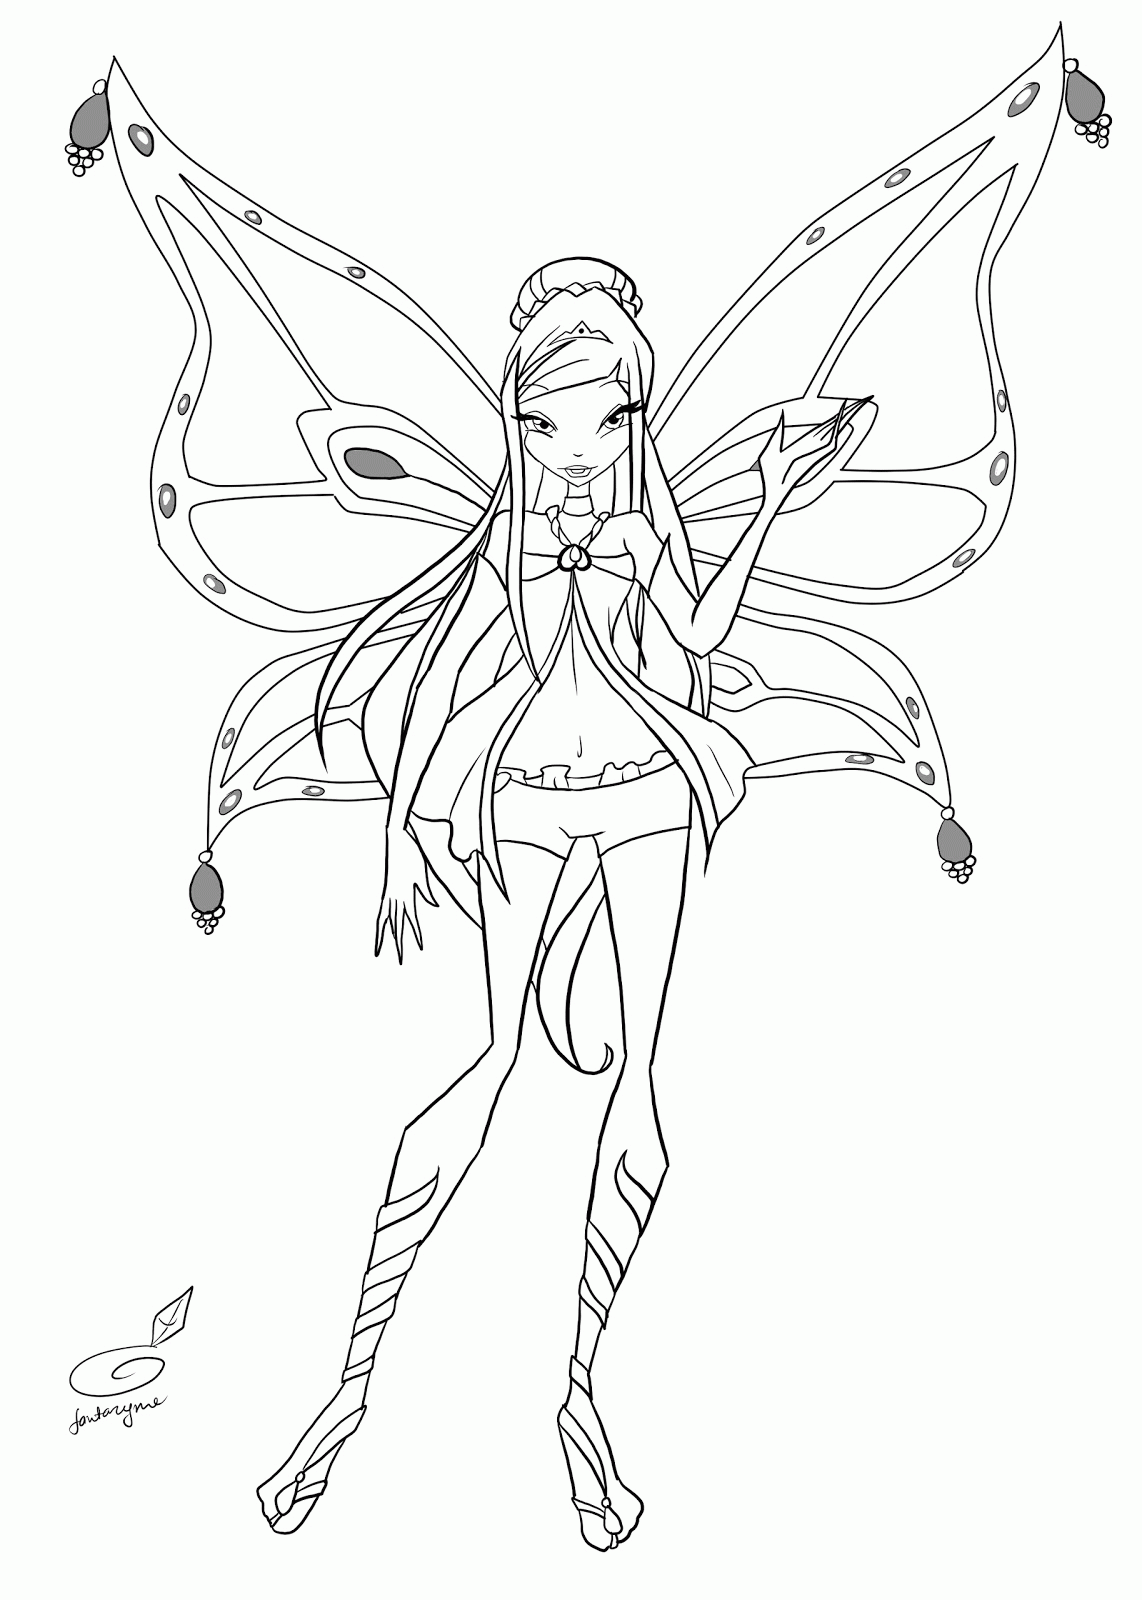 Winx Club Bloom Enchantix Coloring Pages - Coloring Home